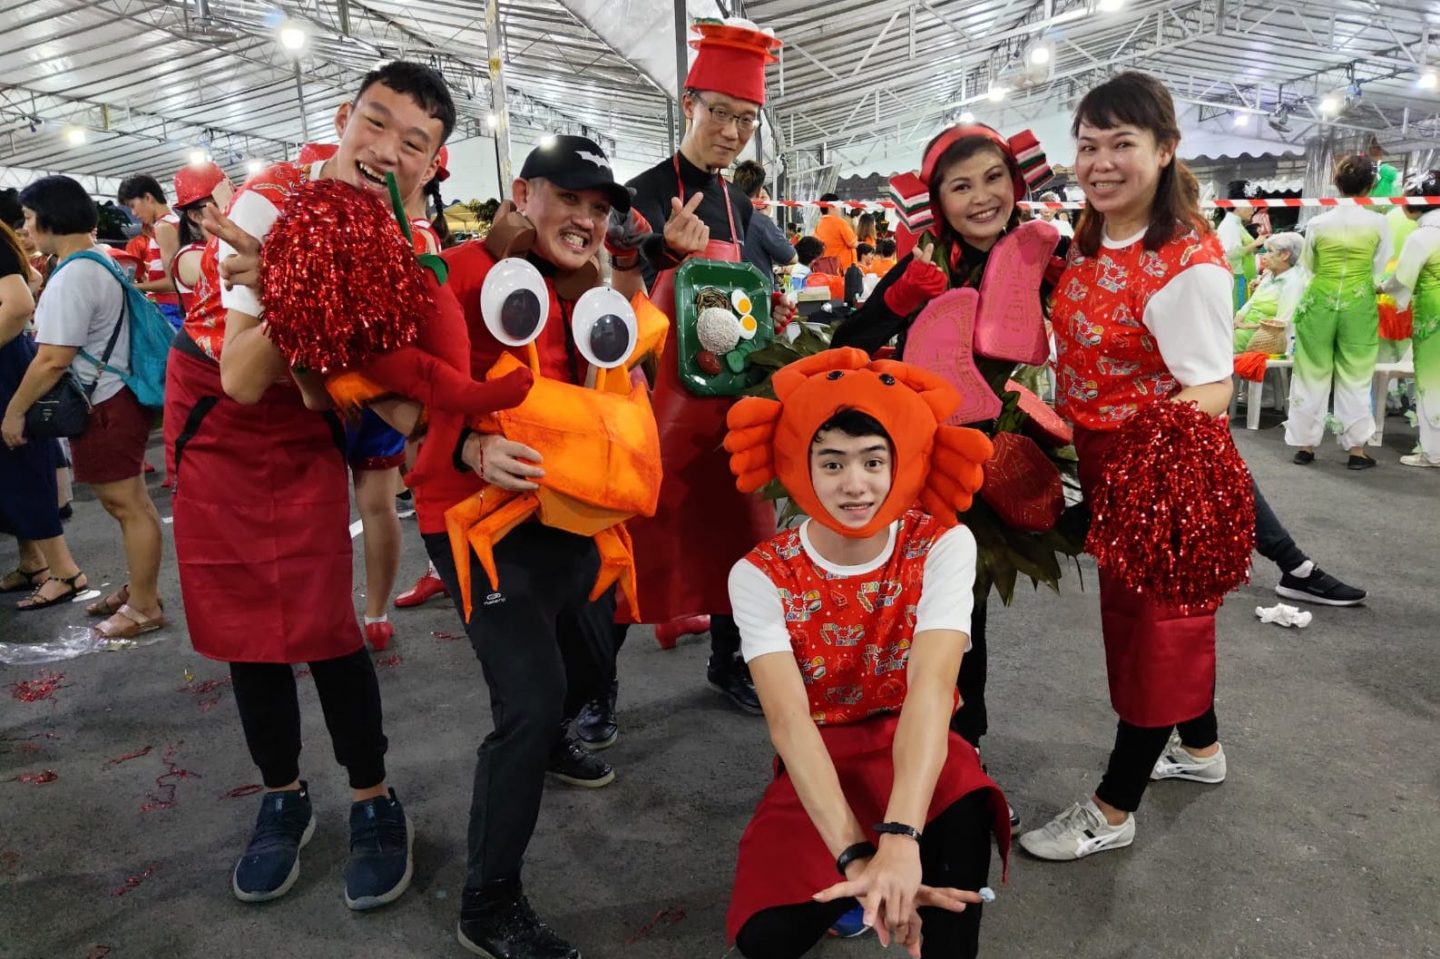 The group will be sporting red tshirts designed by the Singapore Fashion Runway (SFR) featuring drawings of chili crab, satay, kueh lapis and curry puffs, and costumes of chili crab, ang ku kueh and even nasi lemak. 